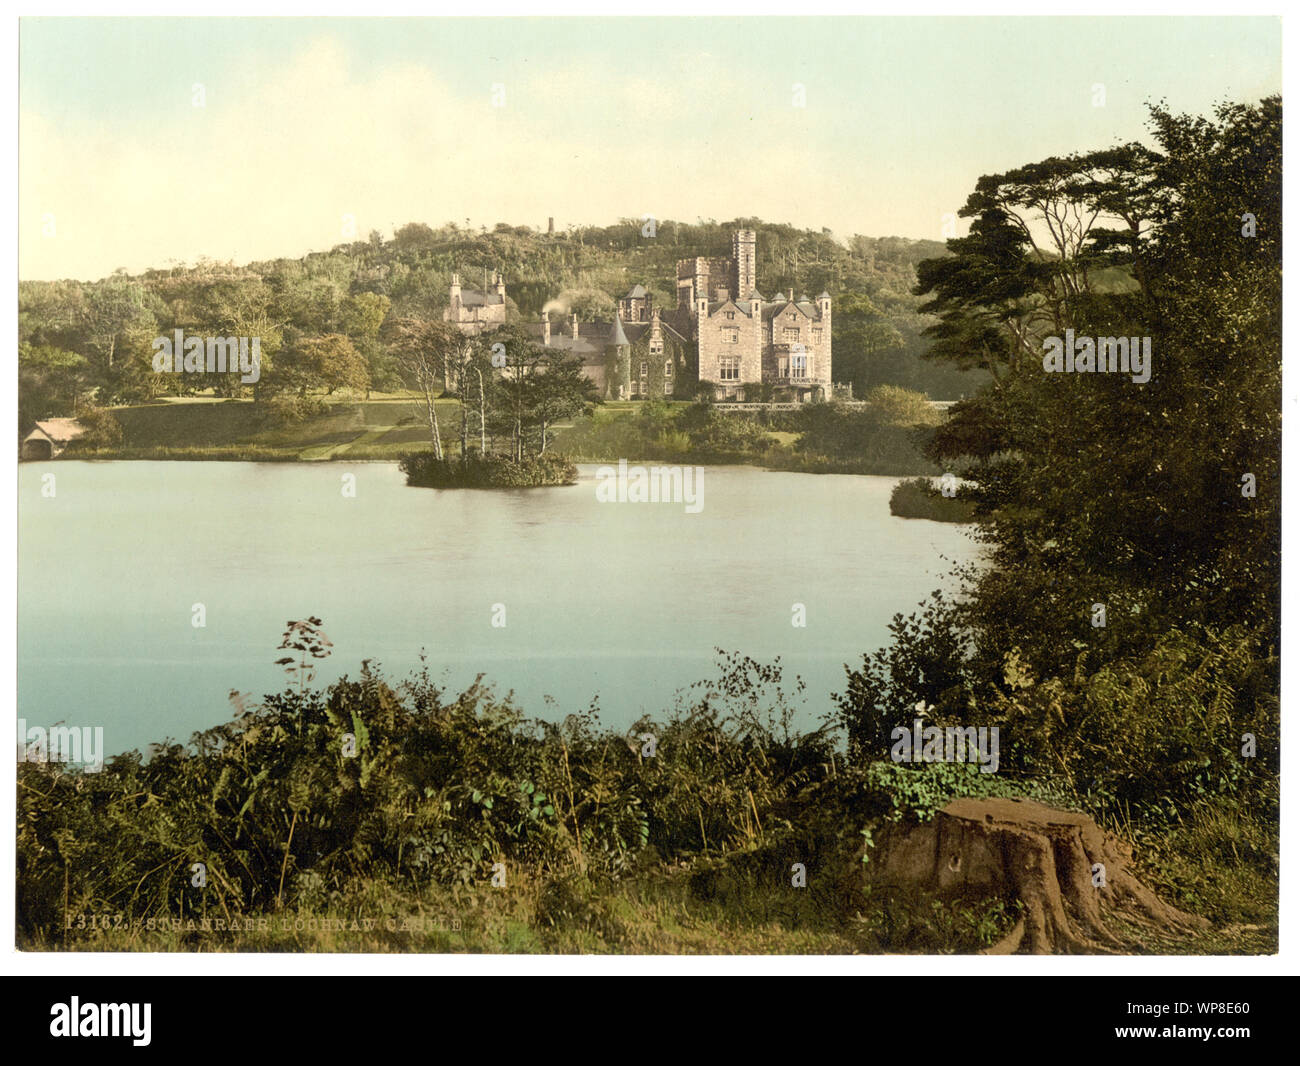 Lochnaw Castle, Stranraer, Scotland; Title from the Detroit Publishing Co., catalogue J-foreign section. Detroit, Mich. : Detroit Photographic Company, 1905.; More information about the Photochrom Print Collection is available at http://hdl.loc.gov/loc.pnp/pp.pgz; Print no. 13162.; Forms part of: Views of landscape and architecture in Scotland in the Photochrom print collection.; Stock Photo